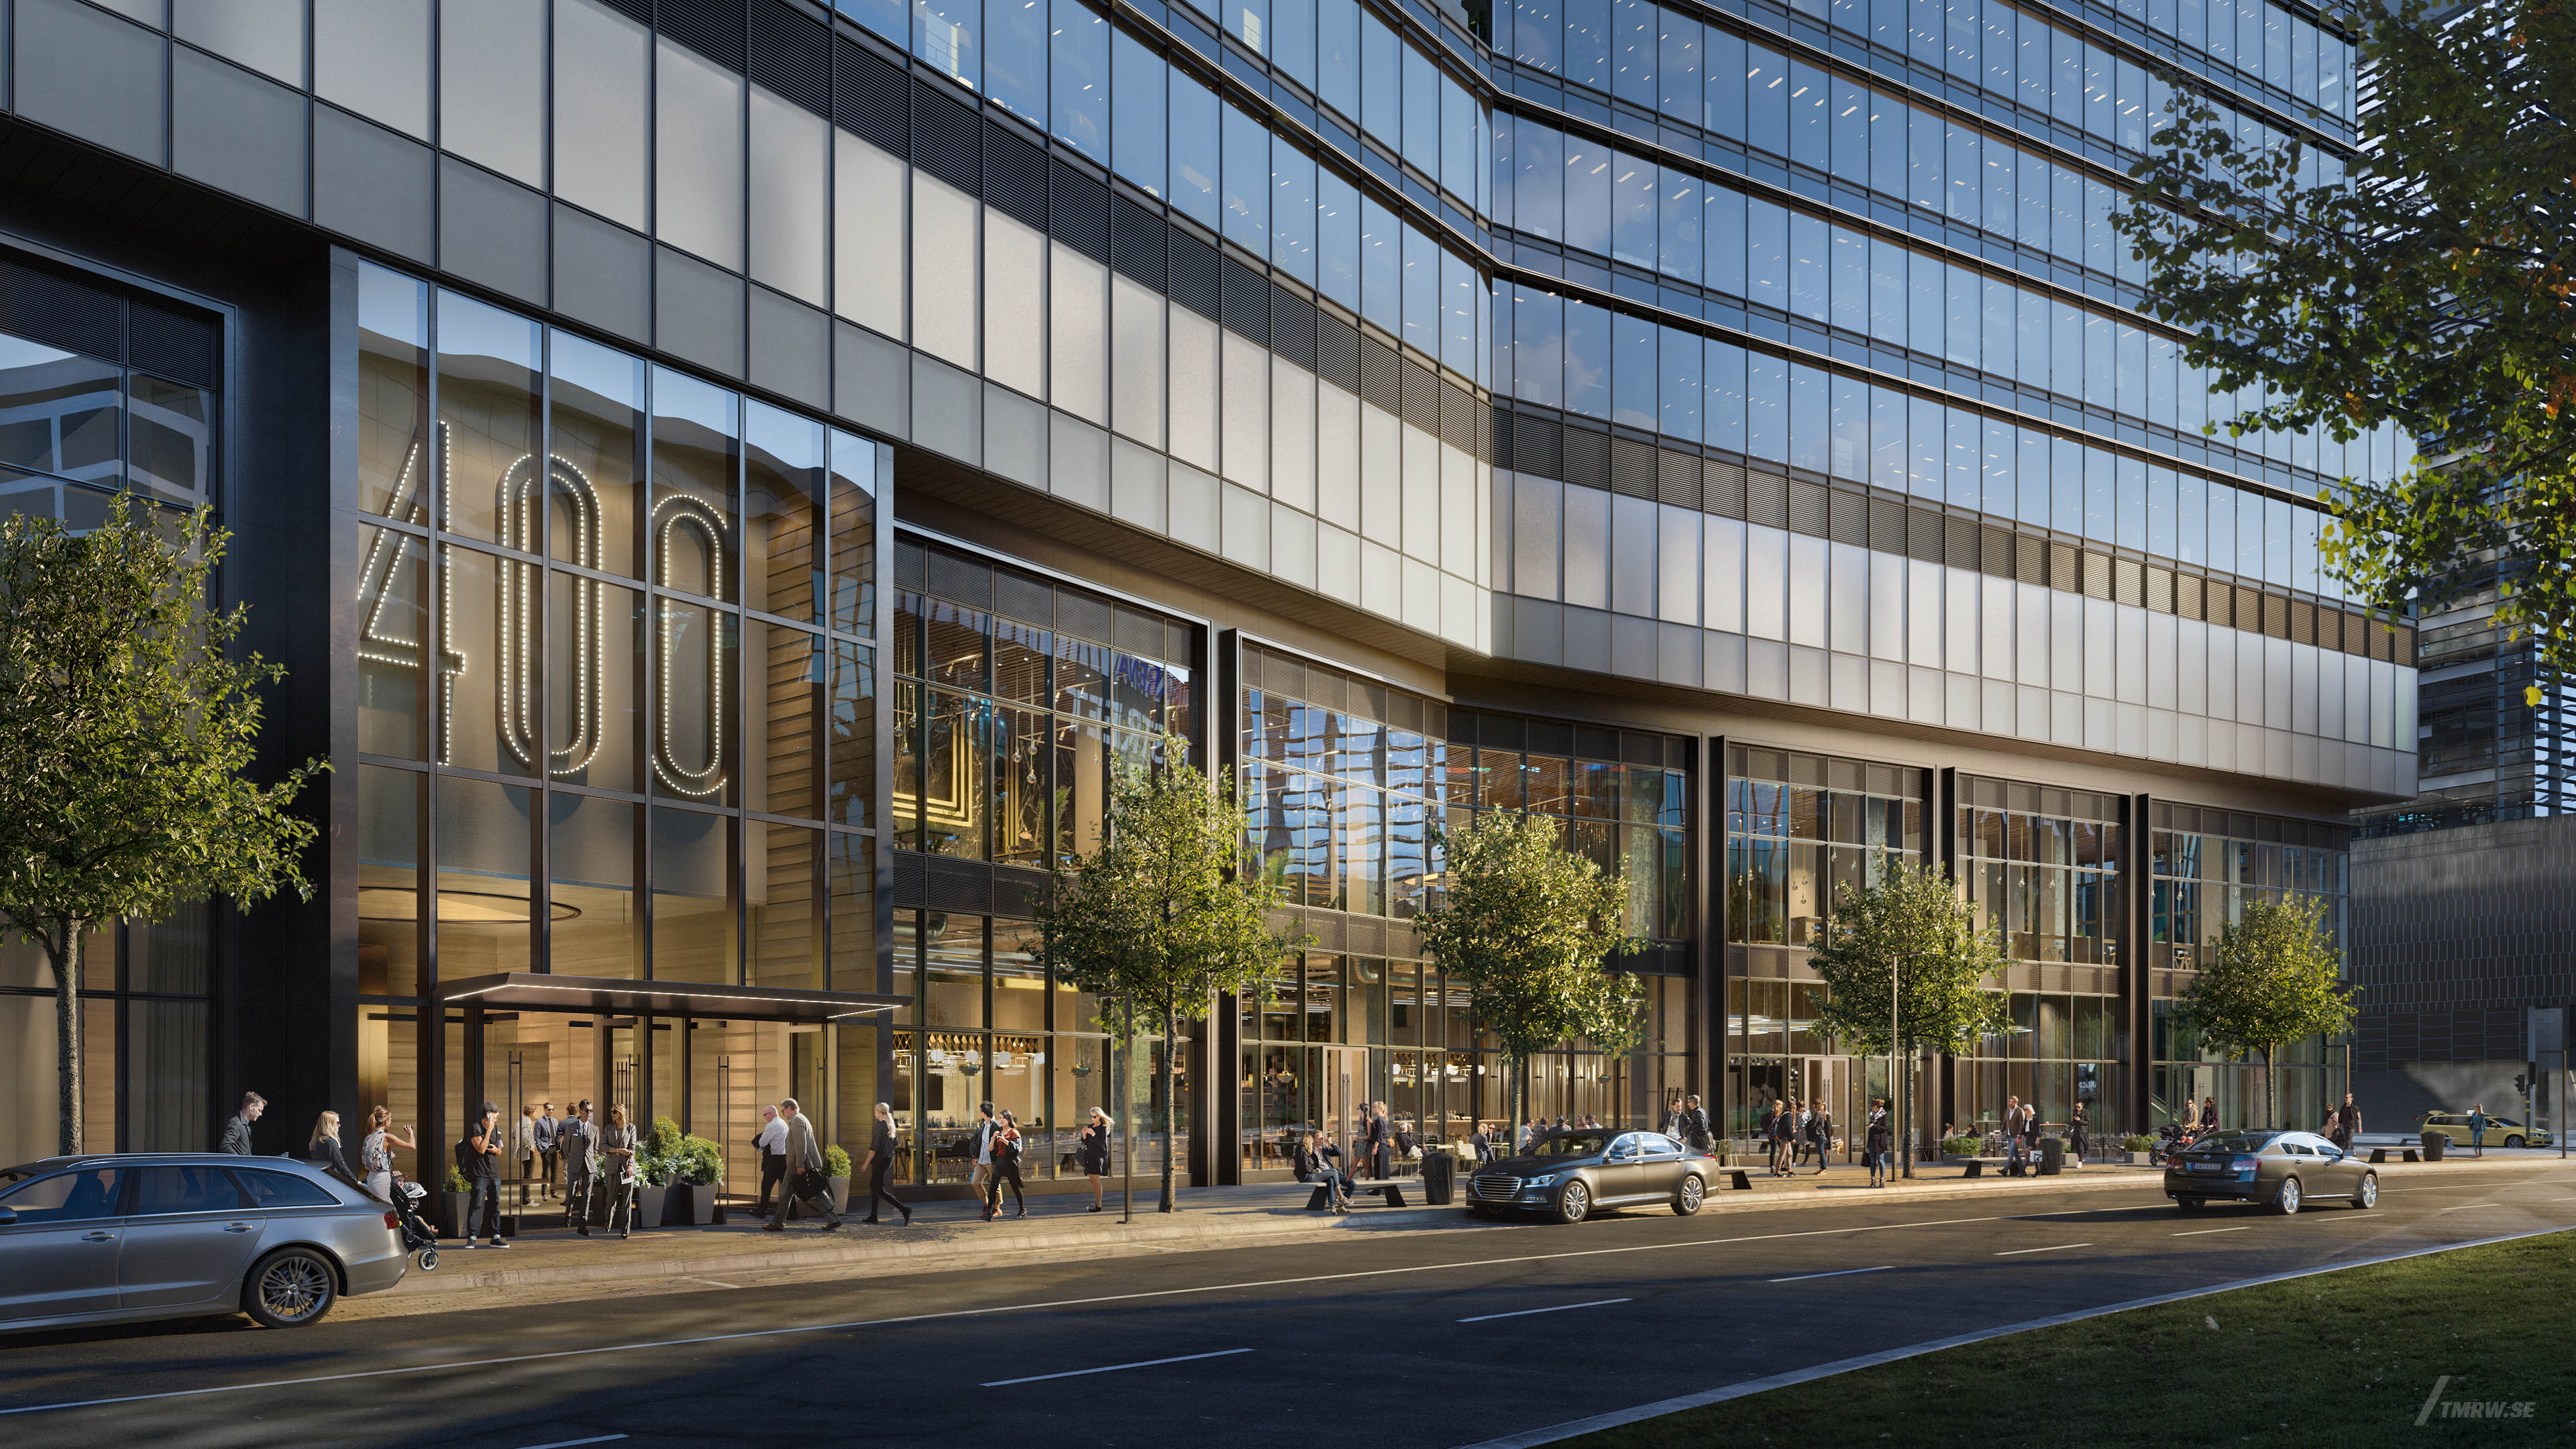 Architectural visualization of 400 Channelside for Gensler, a office entrance in day light from a street view.